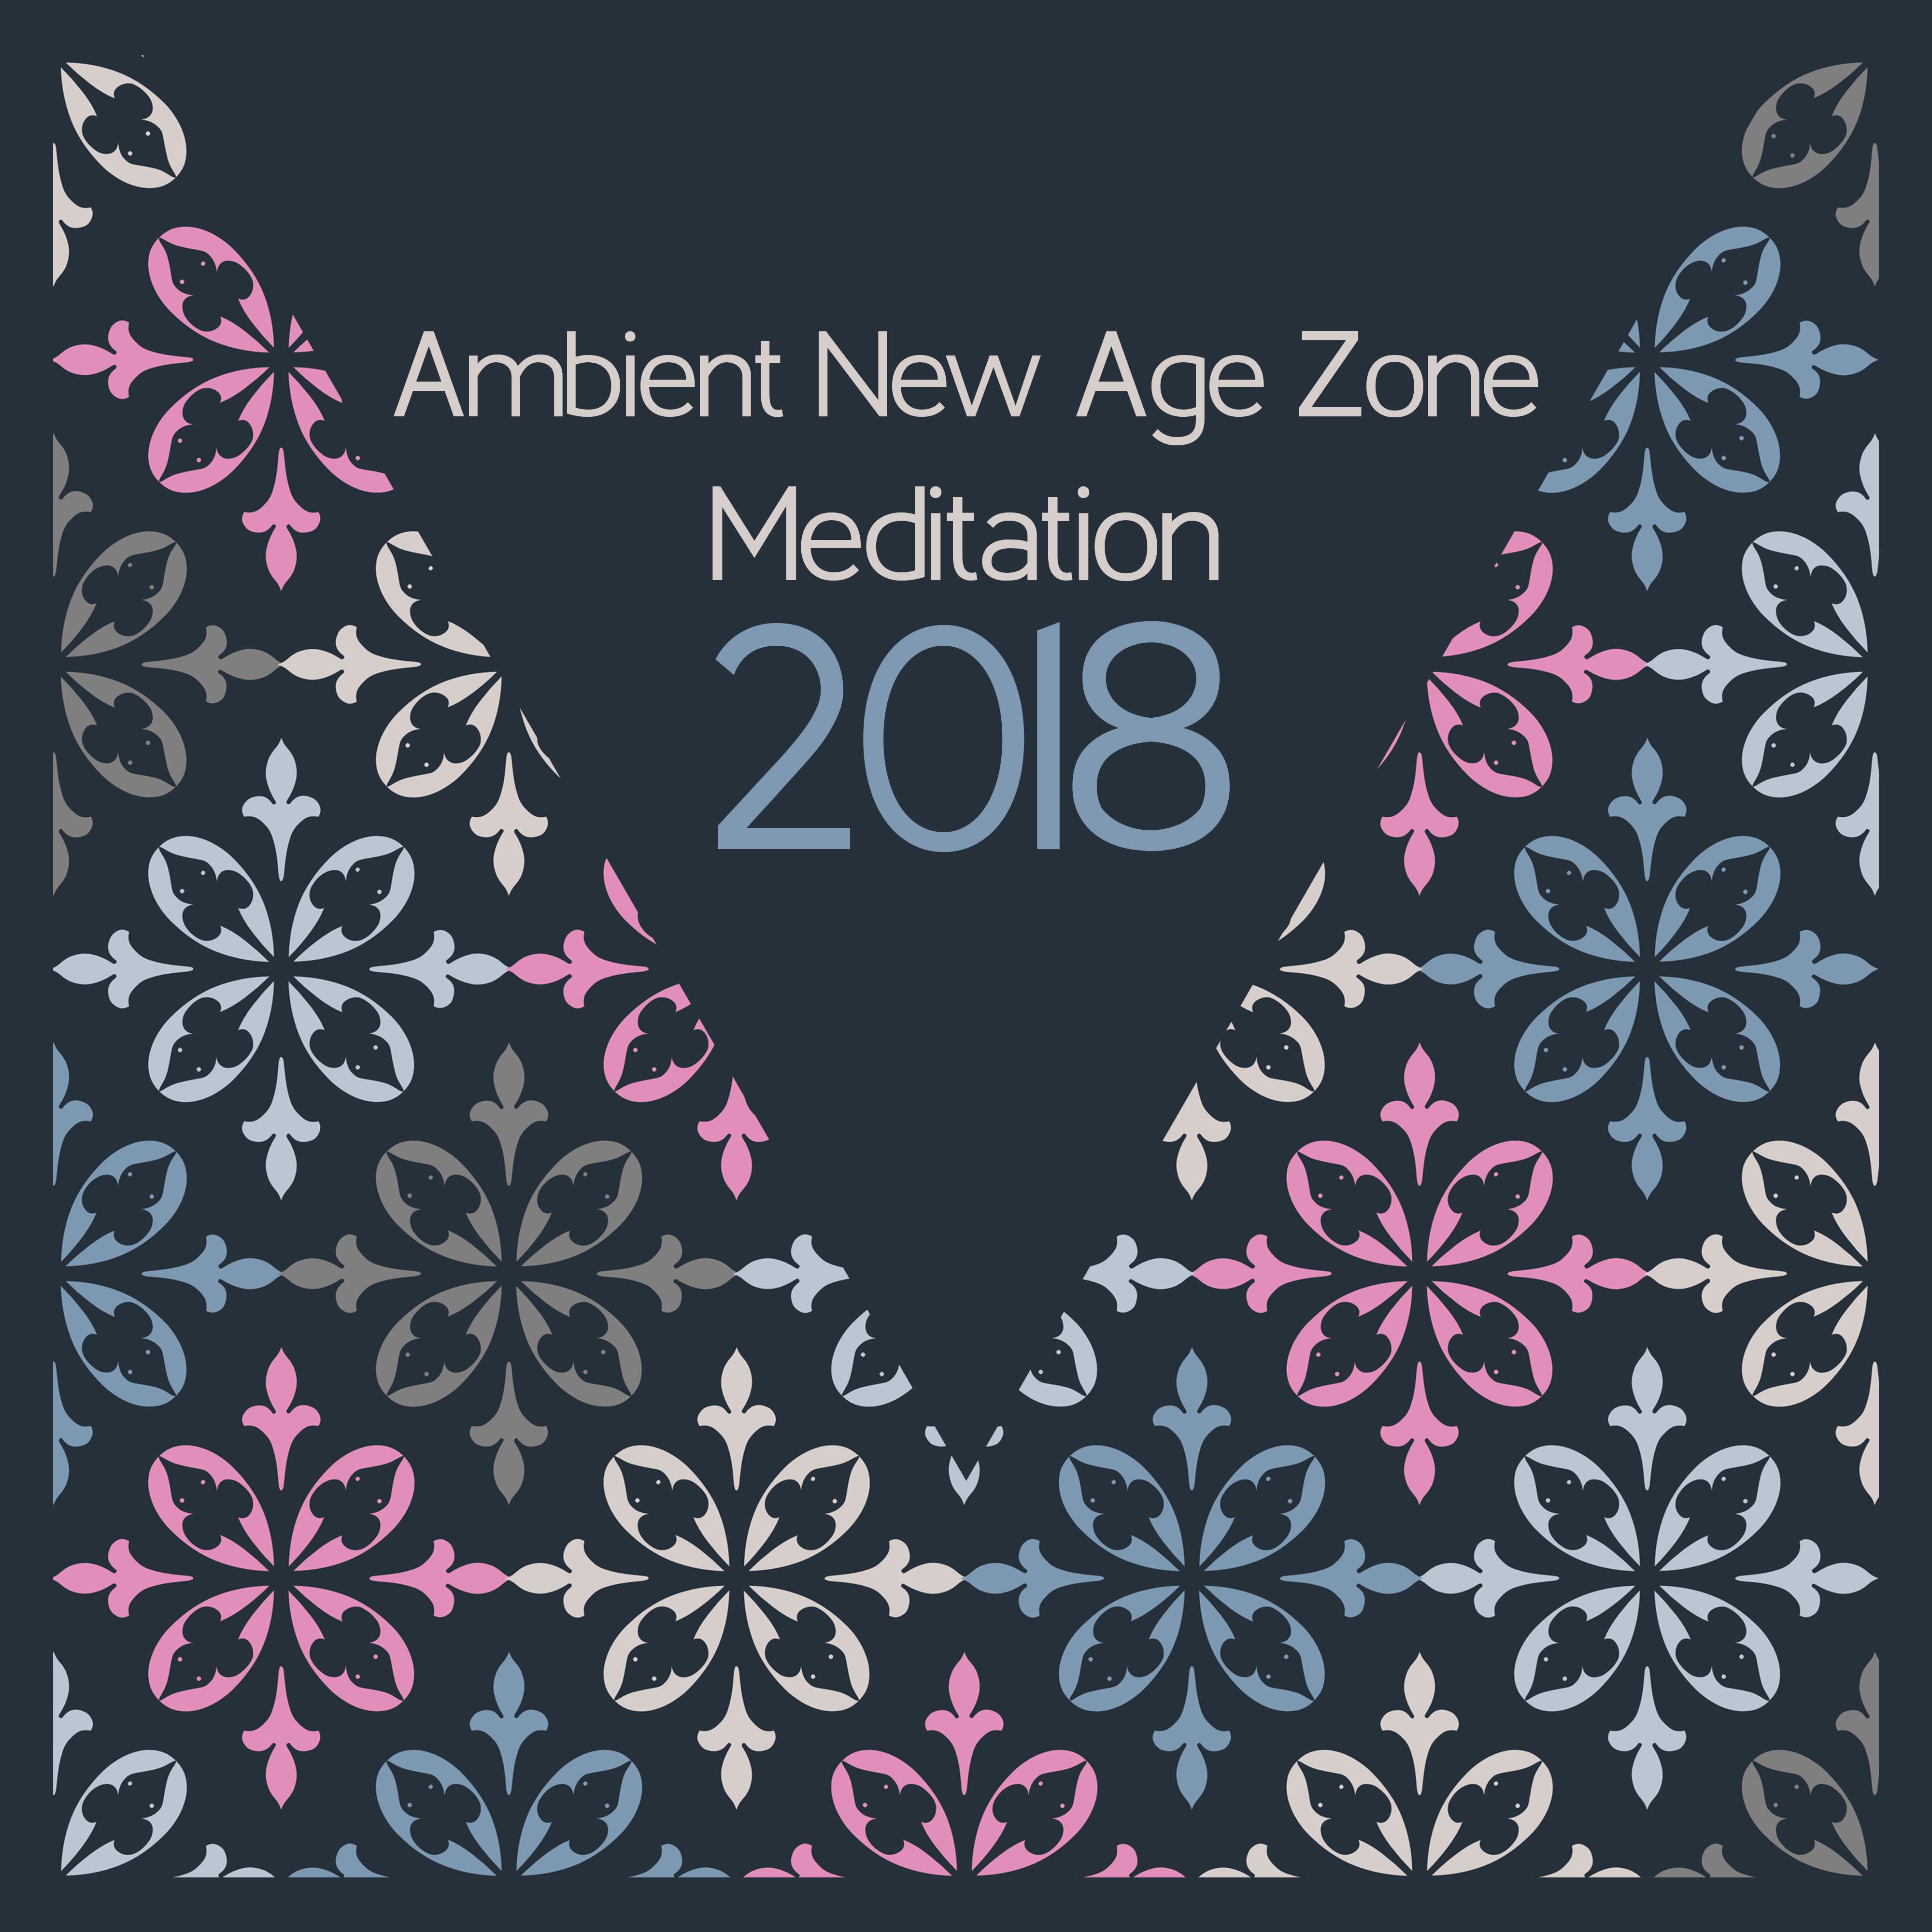 2018 Ambient New Age Zone: Meditation